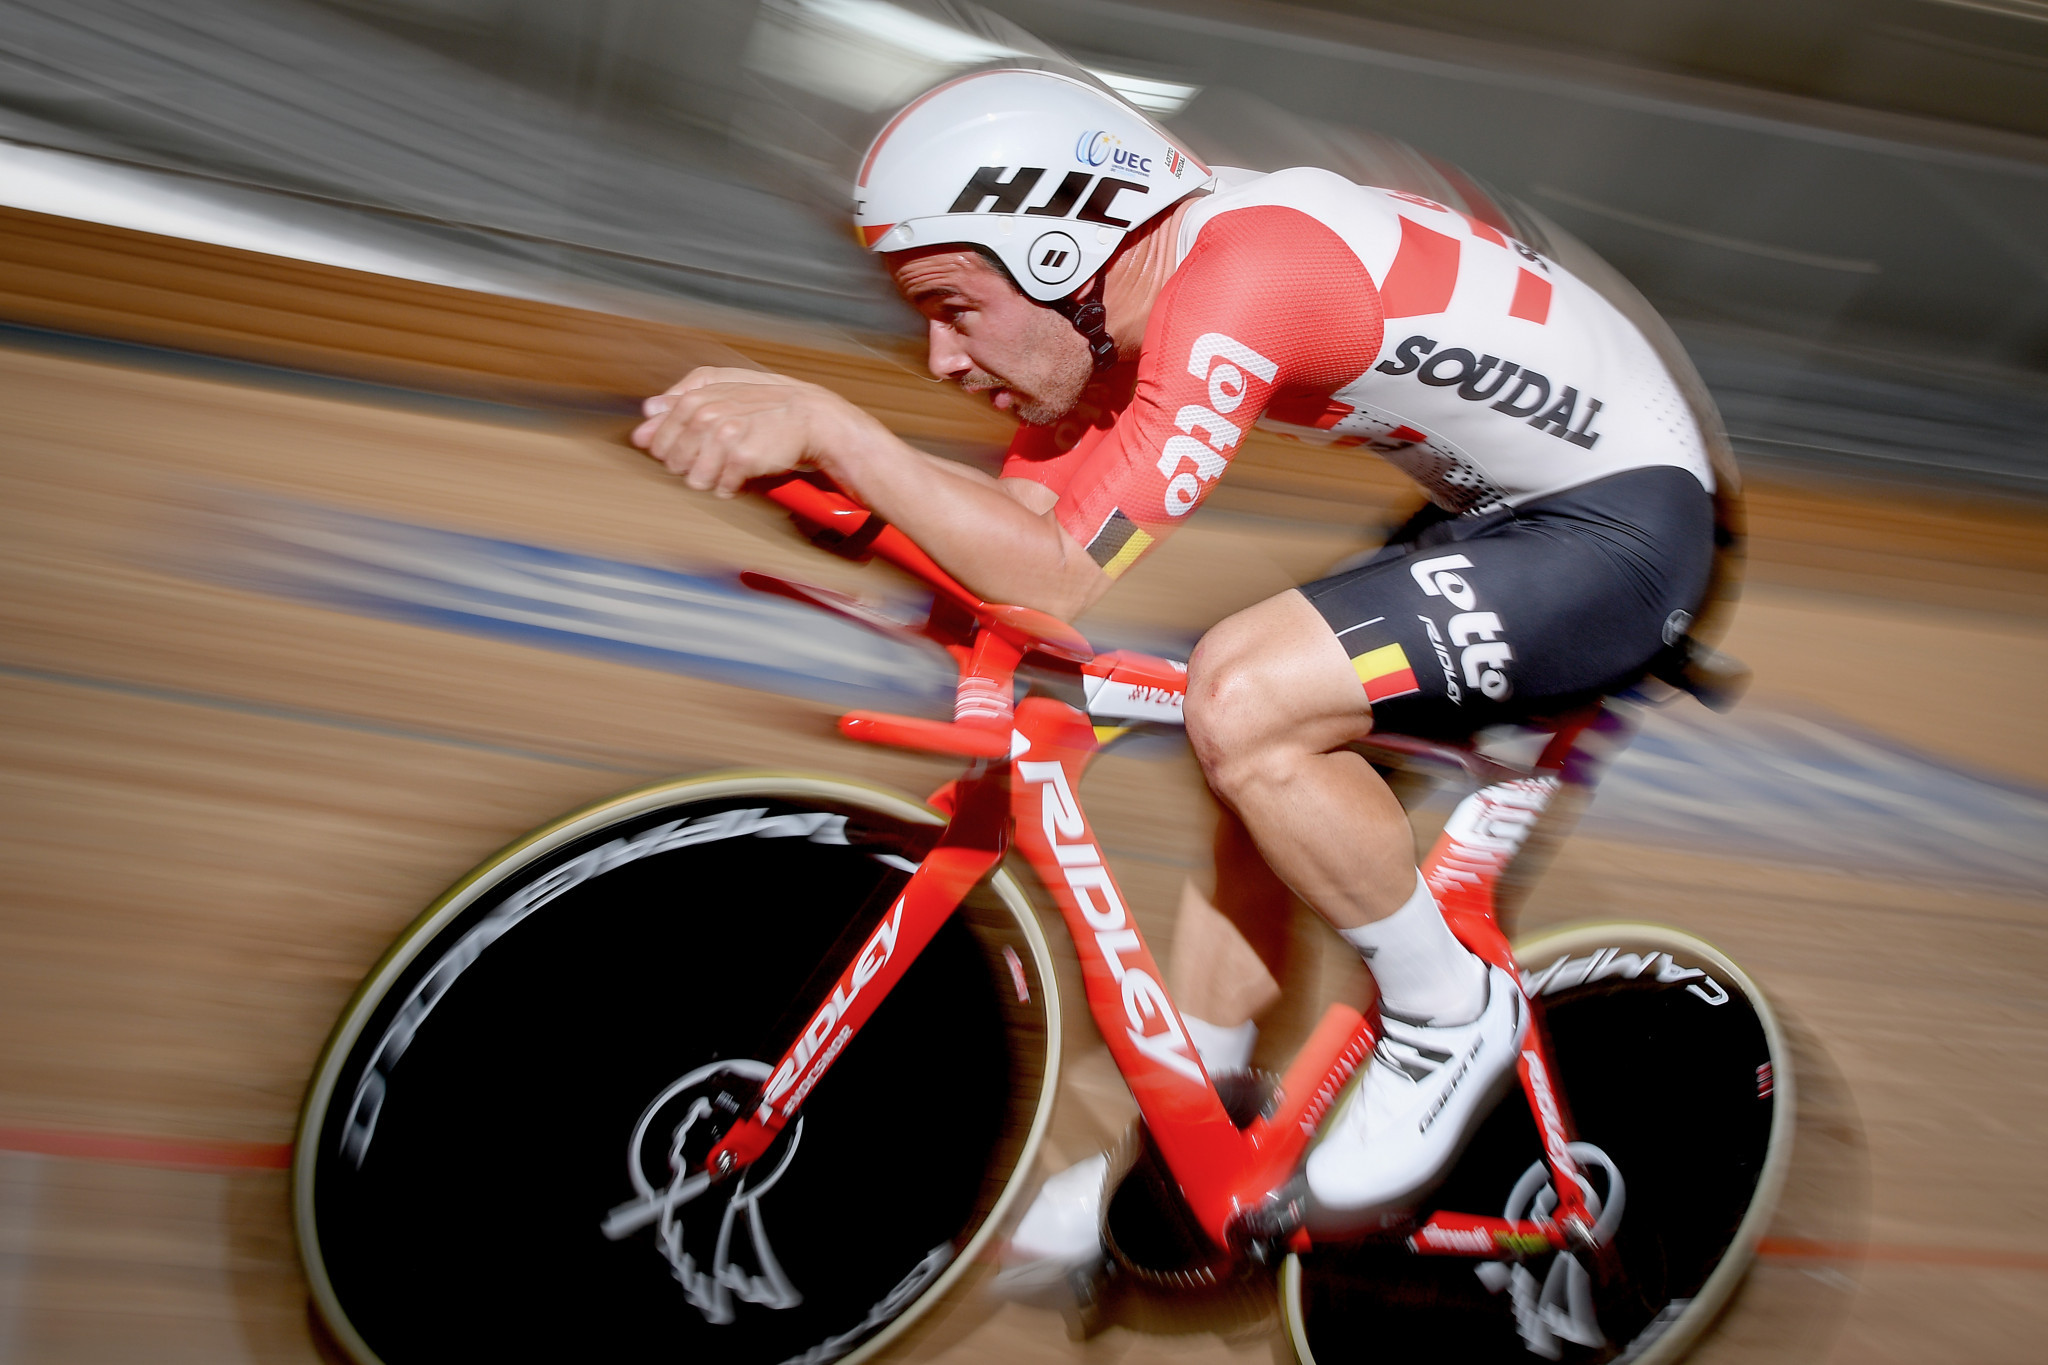 Campenaerts set for attempt on Sir Bradley Wiggins' UCI hour record in Aguascalientes 